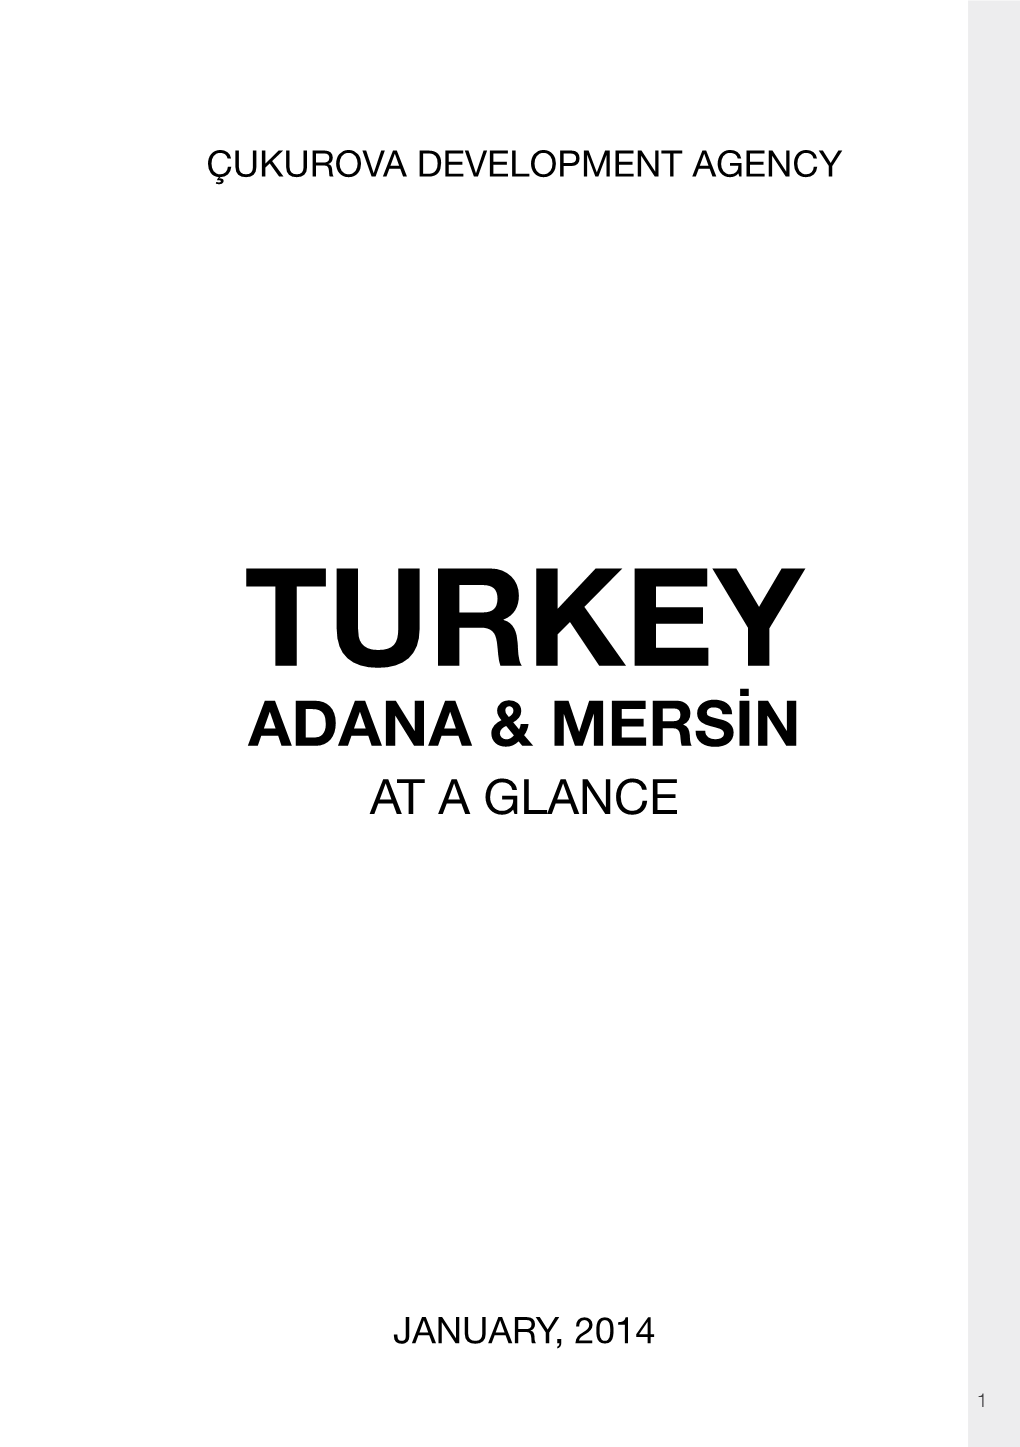 Turkey, Adana and Mersin at a Glance” First Edition